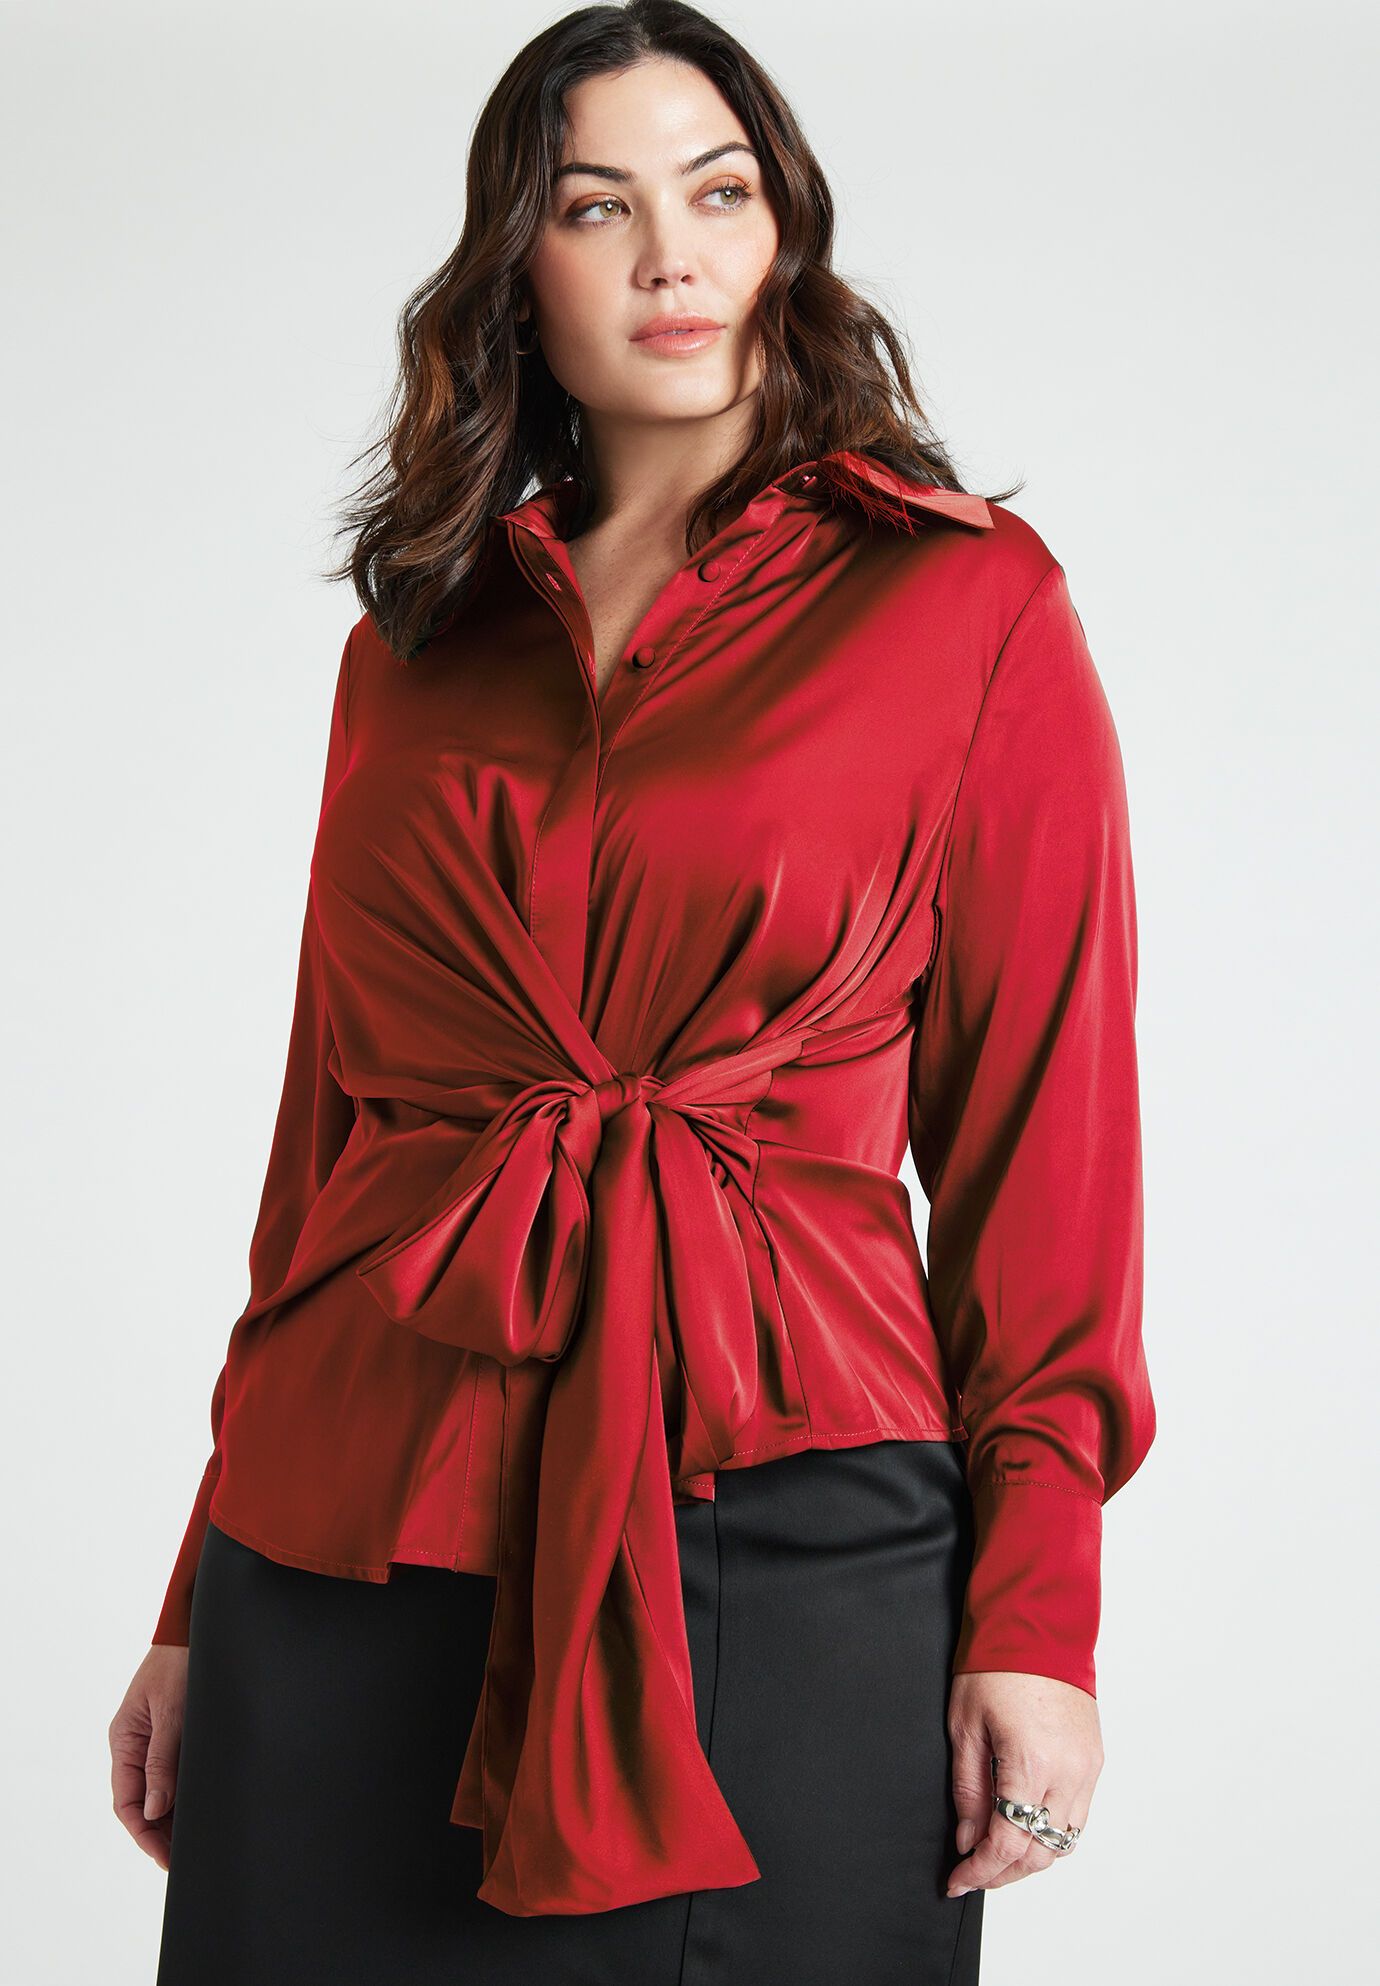 Satin Collared Blouse with Bow | Eloquii